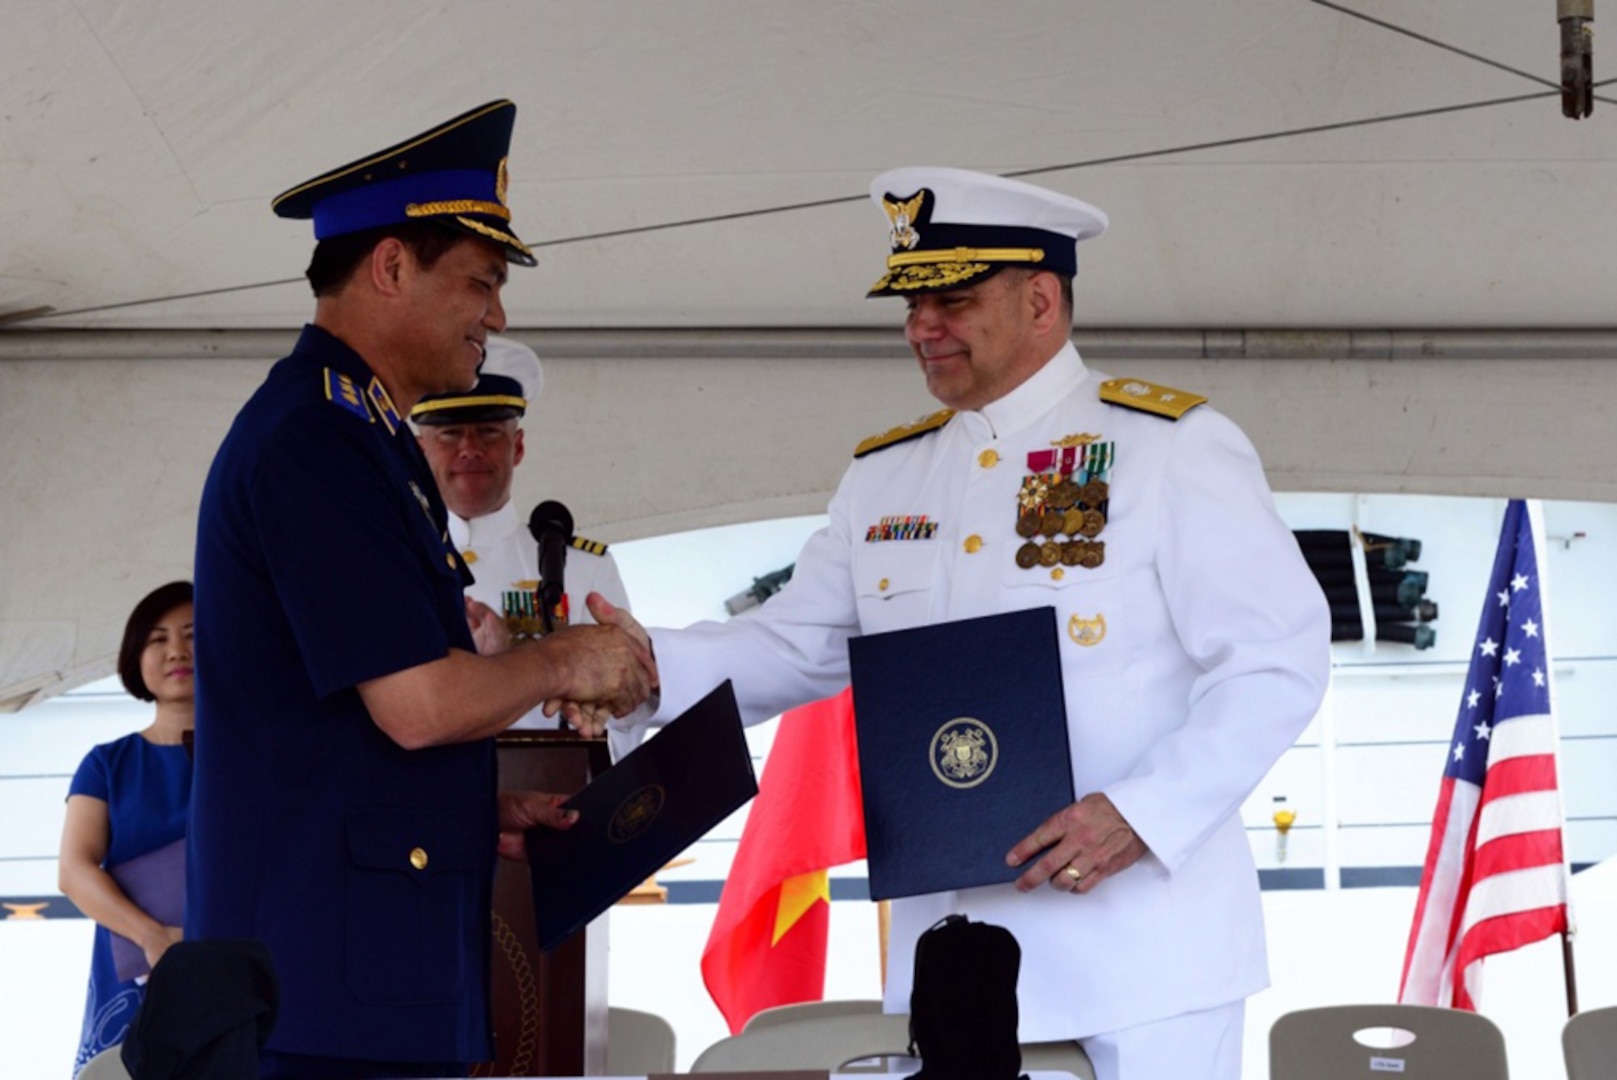 Lt. Gen. Nguyen Quang Dam, commandant, Vietnam coast guard, and Rear Adm. Michael J. Haycock, assistant commandant for acquisition and chief acquisition officer, U.S. Coast Guard, shake hands during a transfer ceremony at Coast Guard Base Honolulu, May 25, 2017. The cutter, now CSB-8020, will continue to serve the maritime community on the opposite side of the Pacific. 